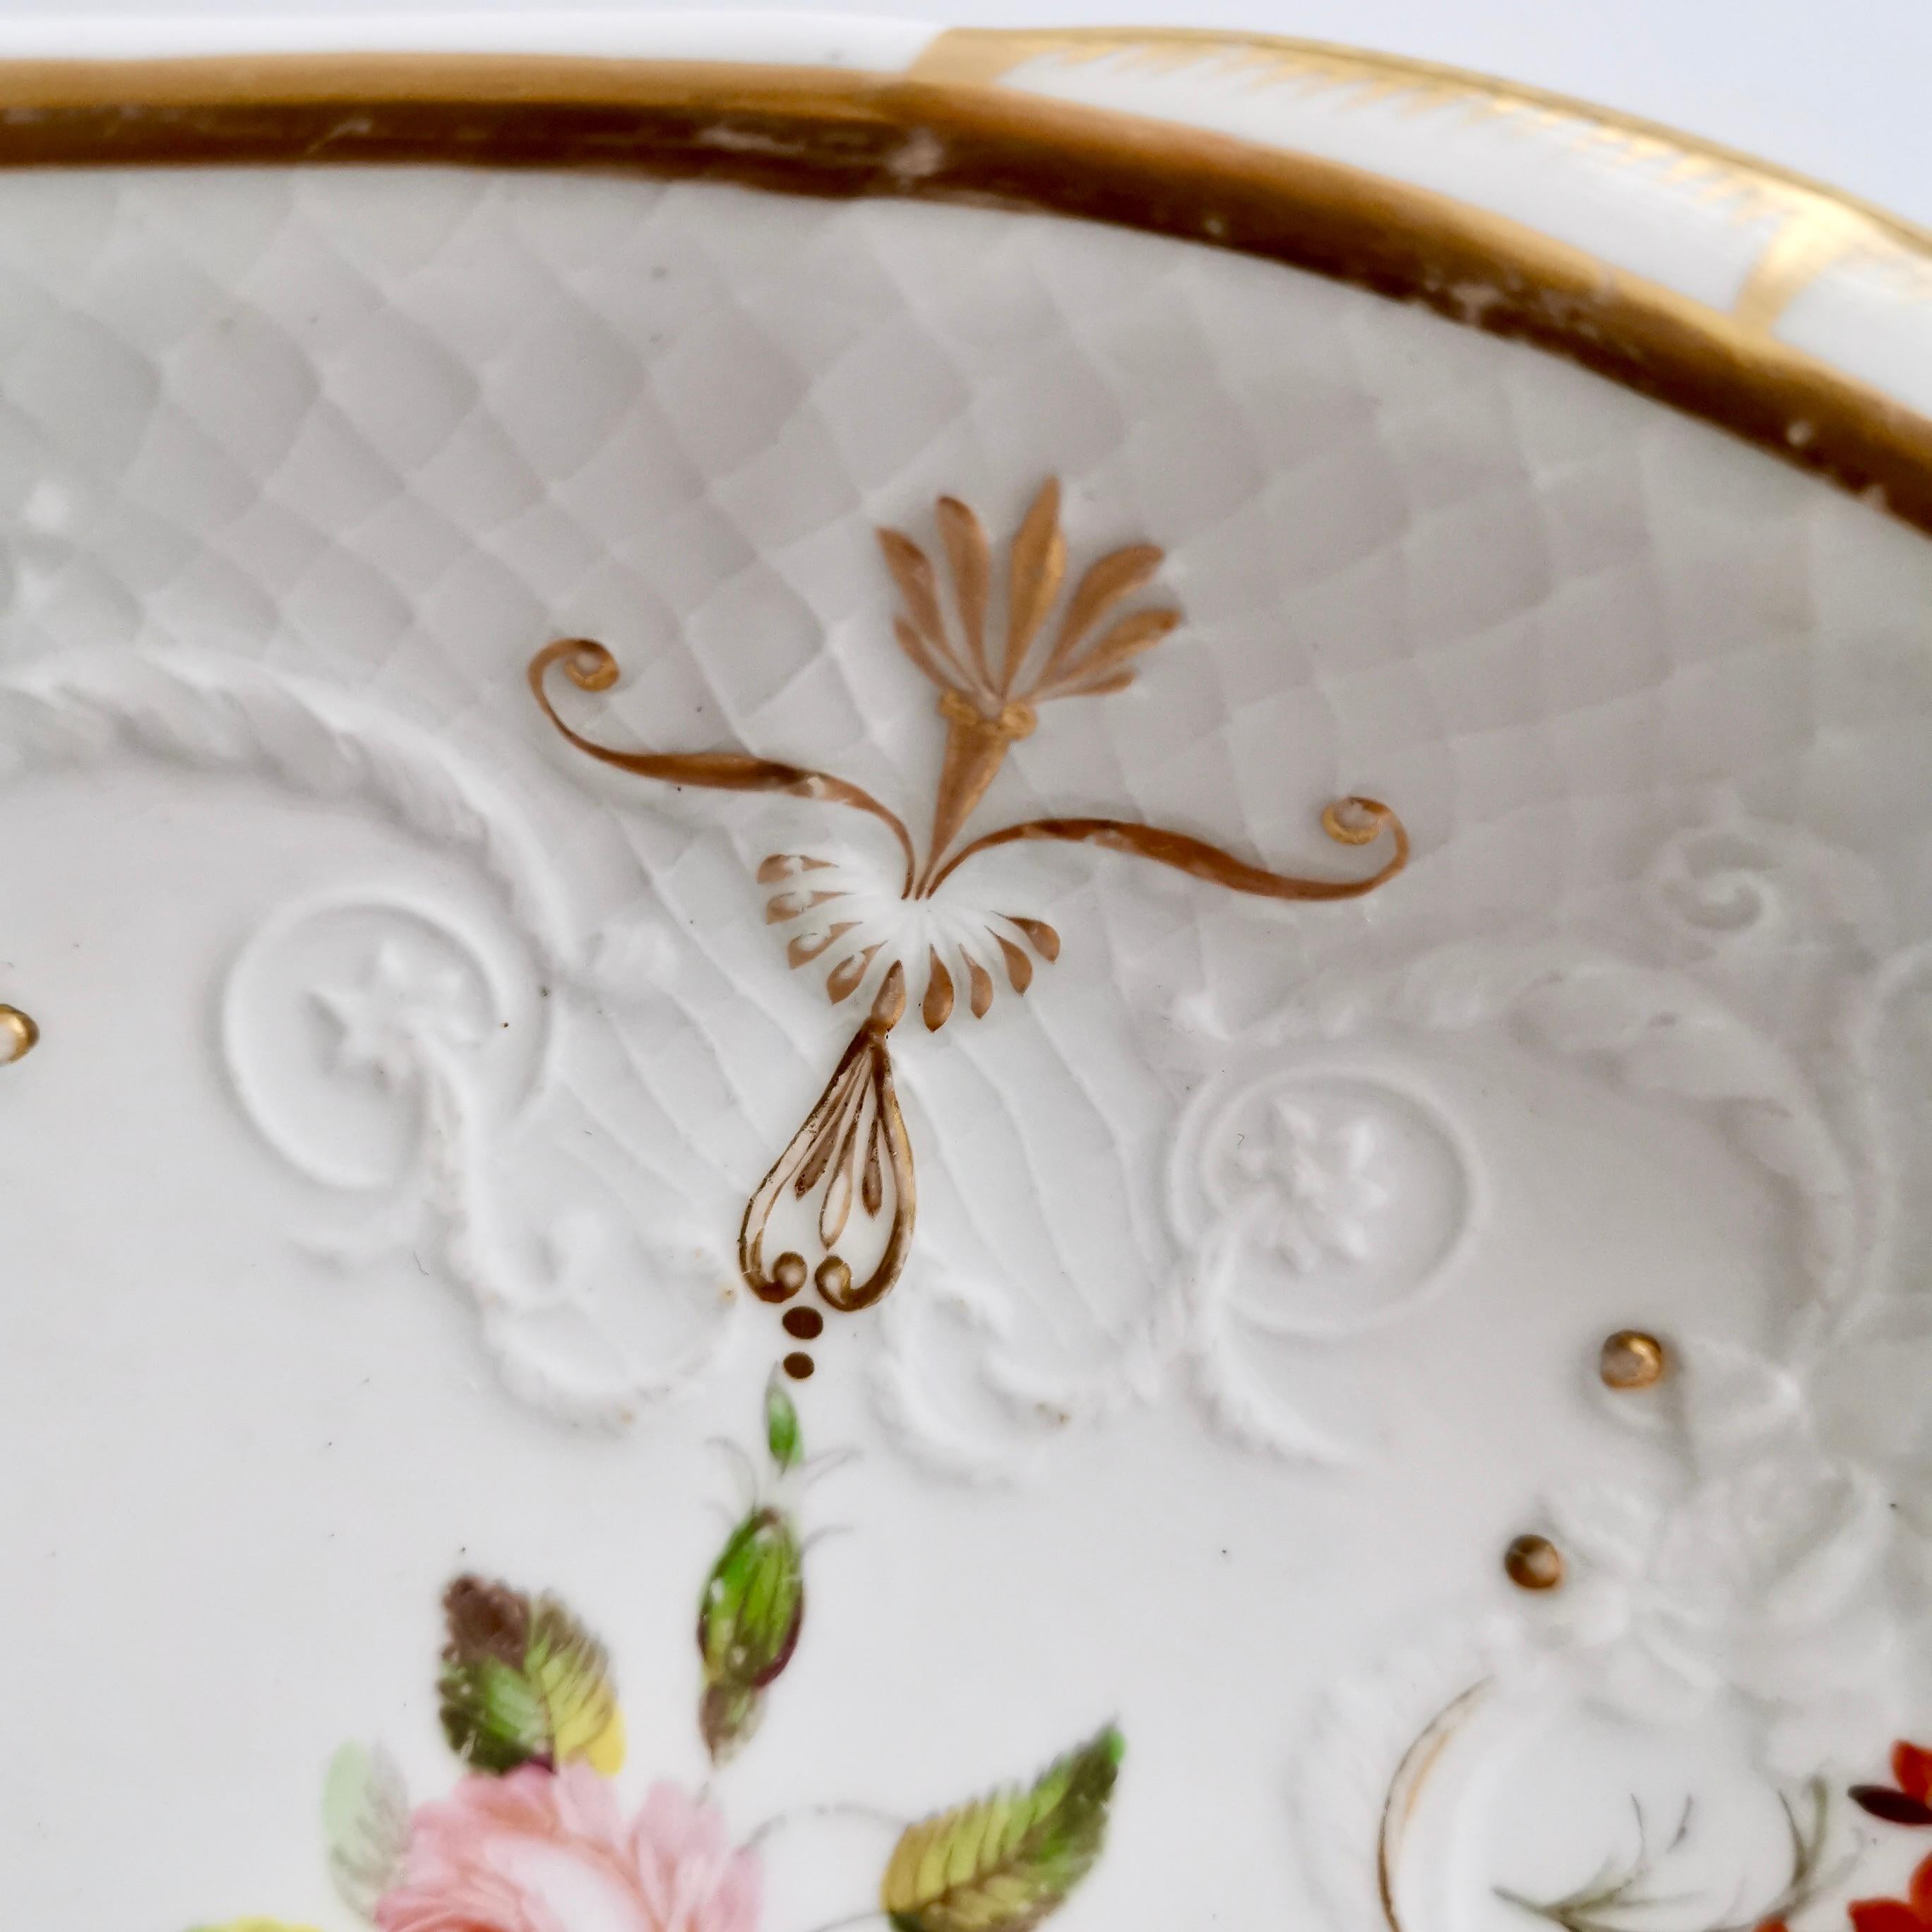 19th Century Staffordshire Serving Dish White Floral with Fine Union Moulding circa 1801-1820